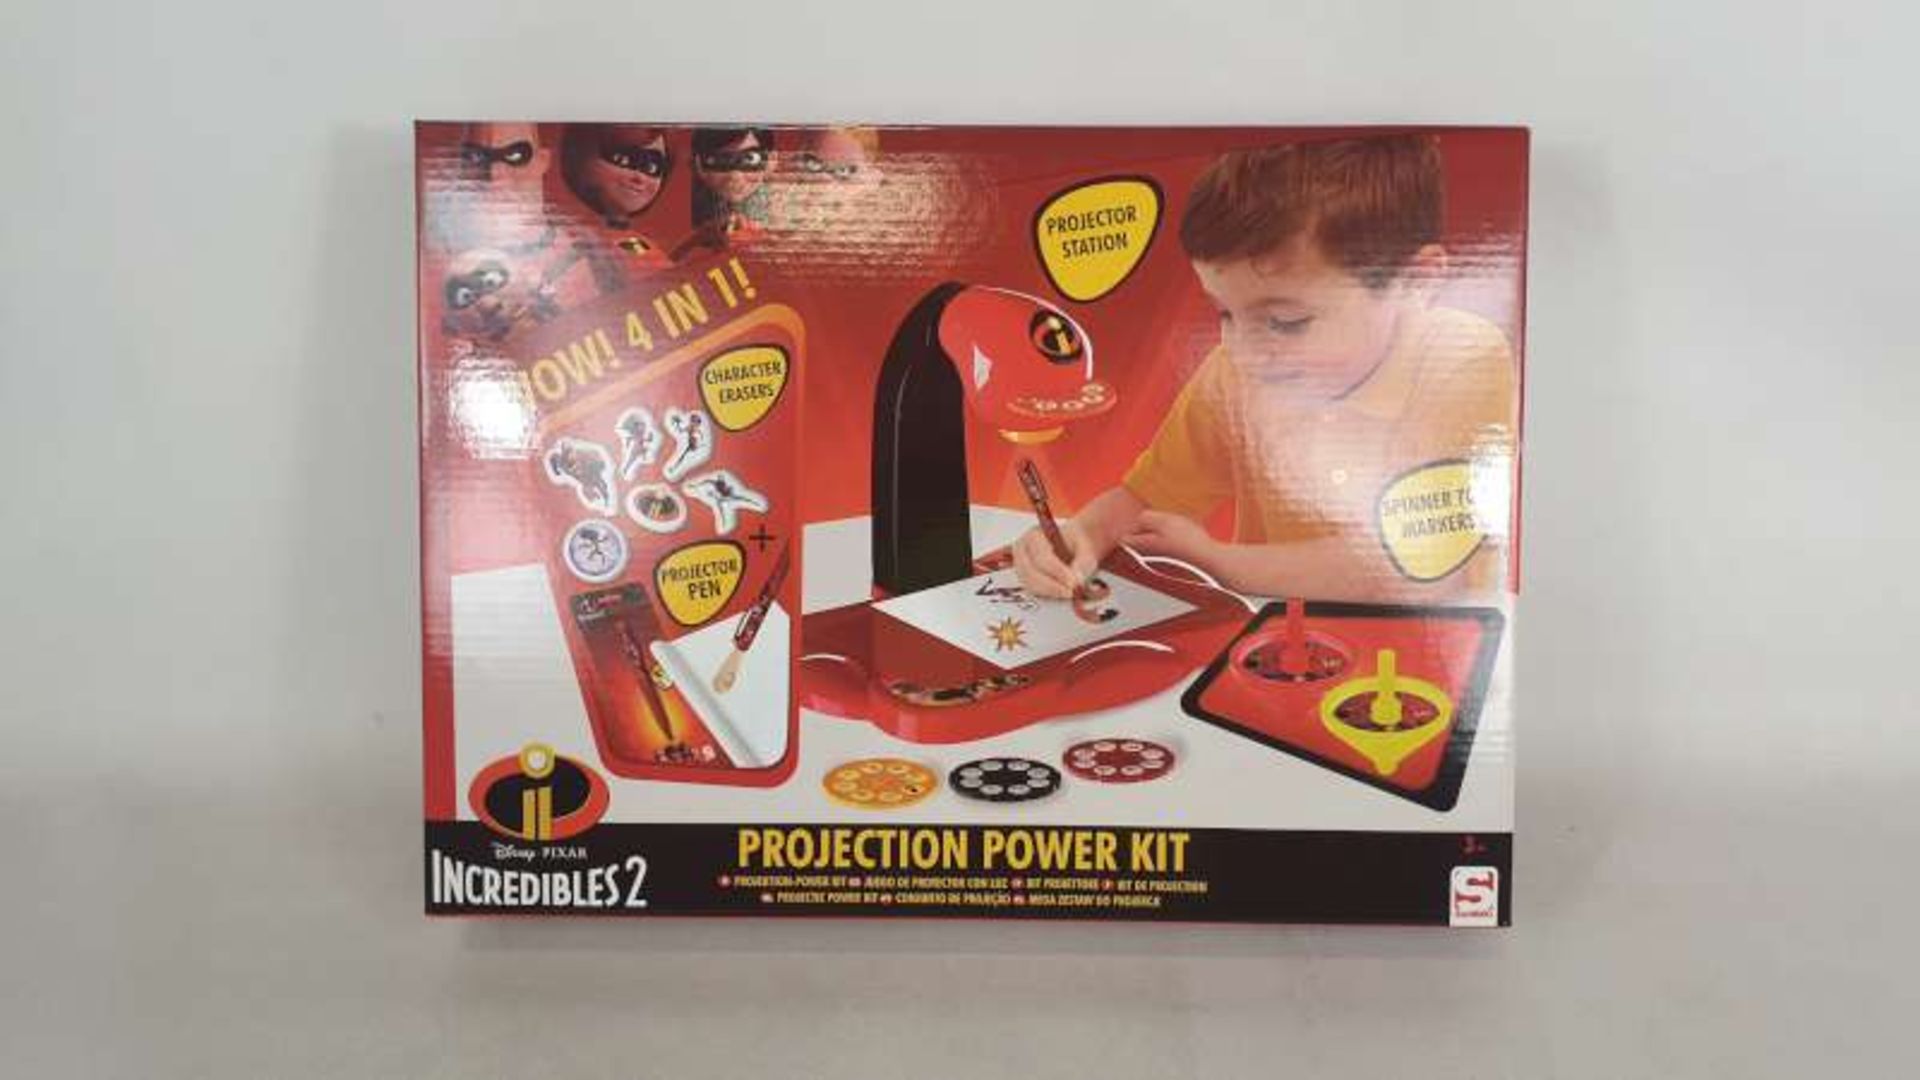 24 X BRAND NEW BOXED DISNEY PIXAR INCREDIABLES PROJECTION POWER KIT IN 4 BOXES